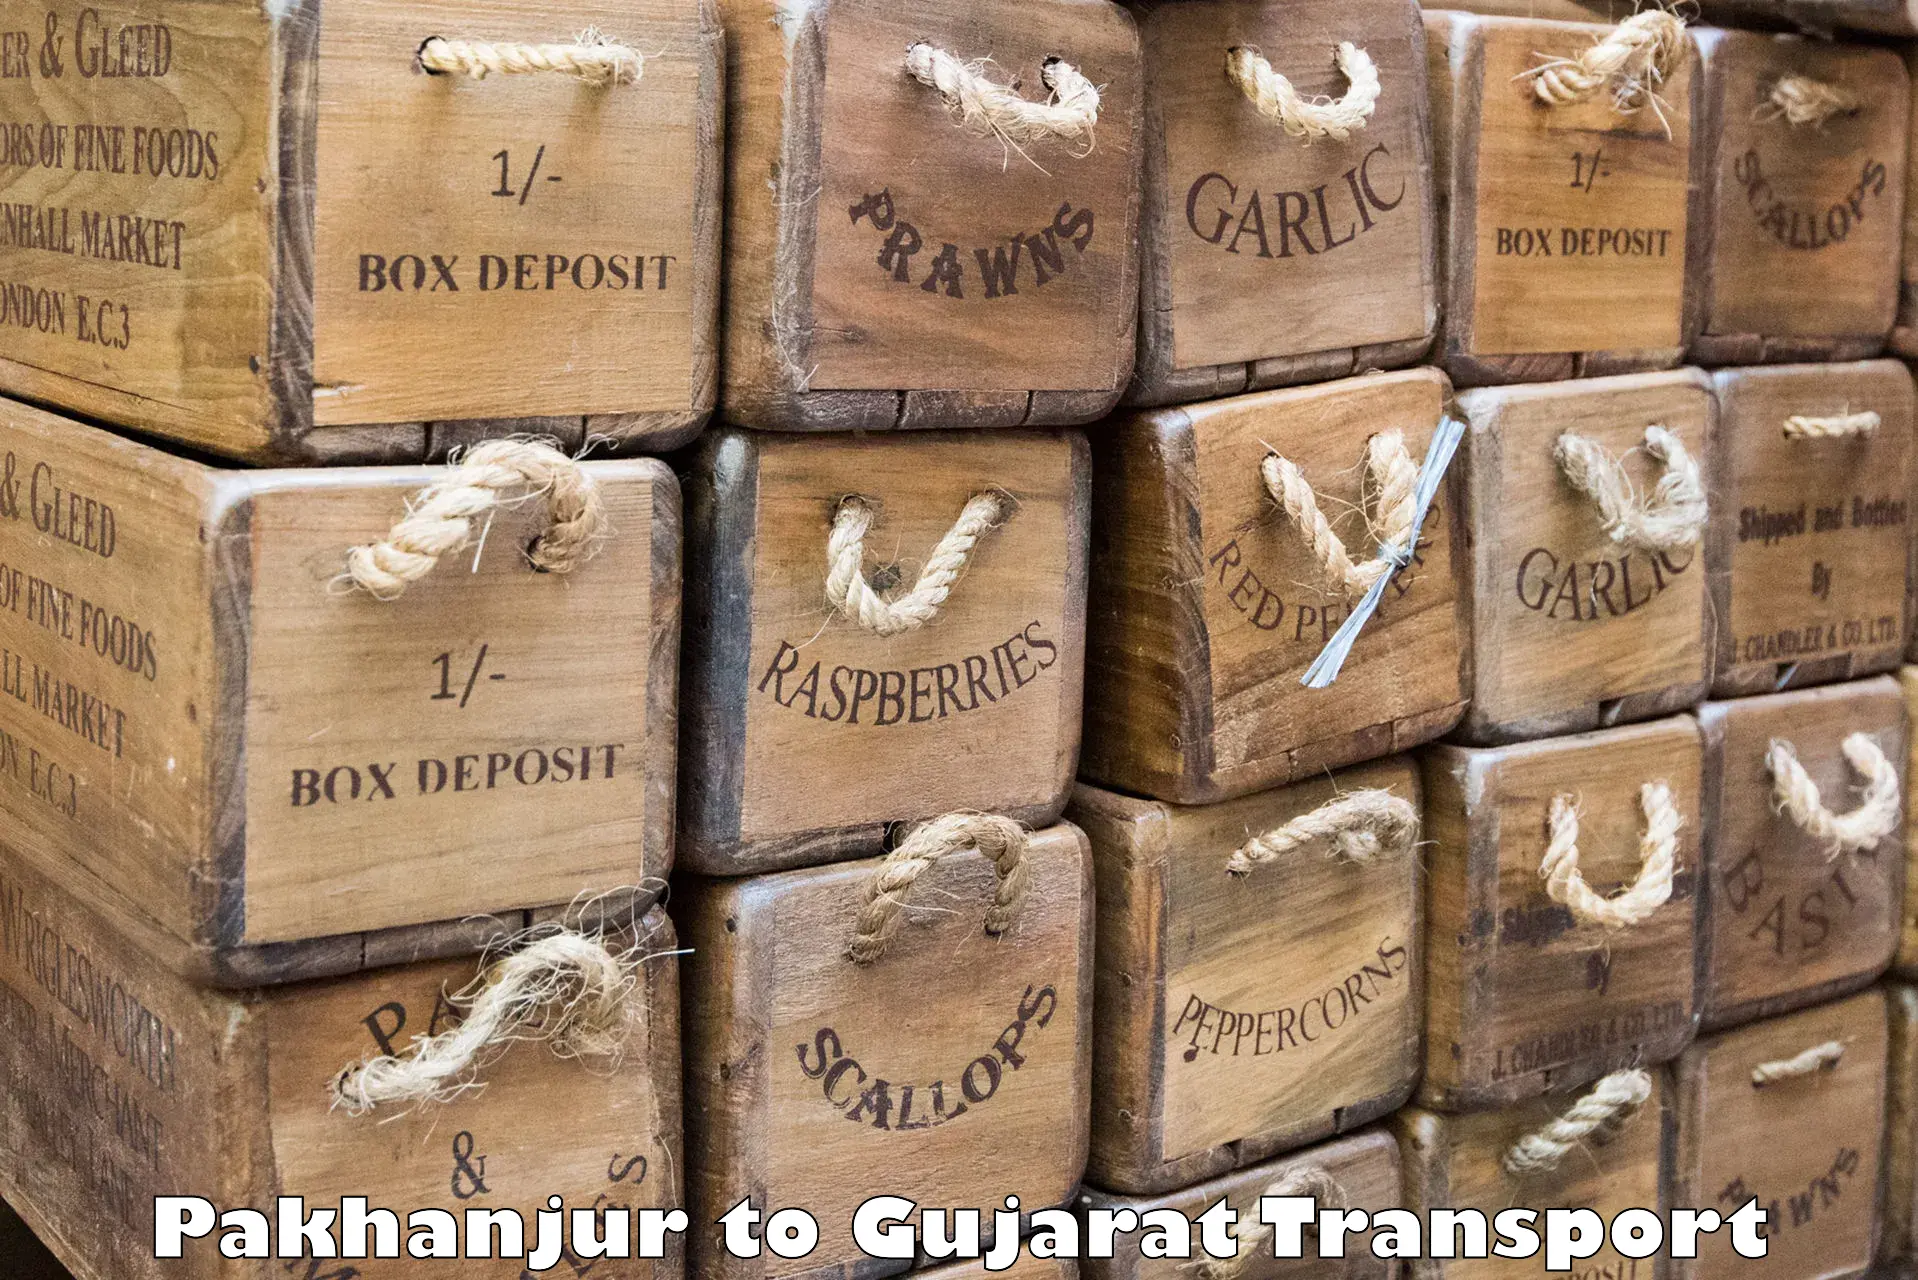 Truck transport companies in India Pakhanjur to Anand